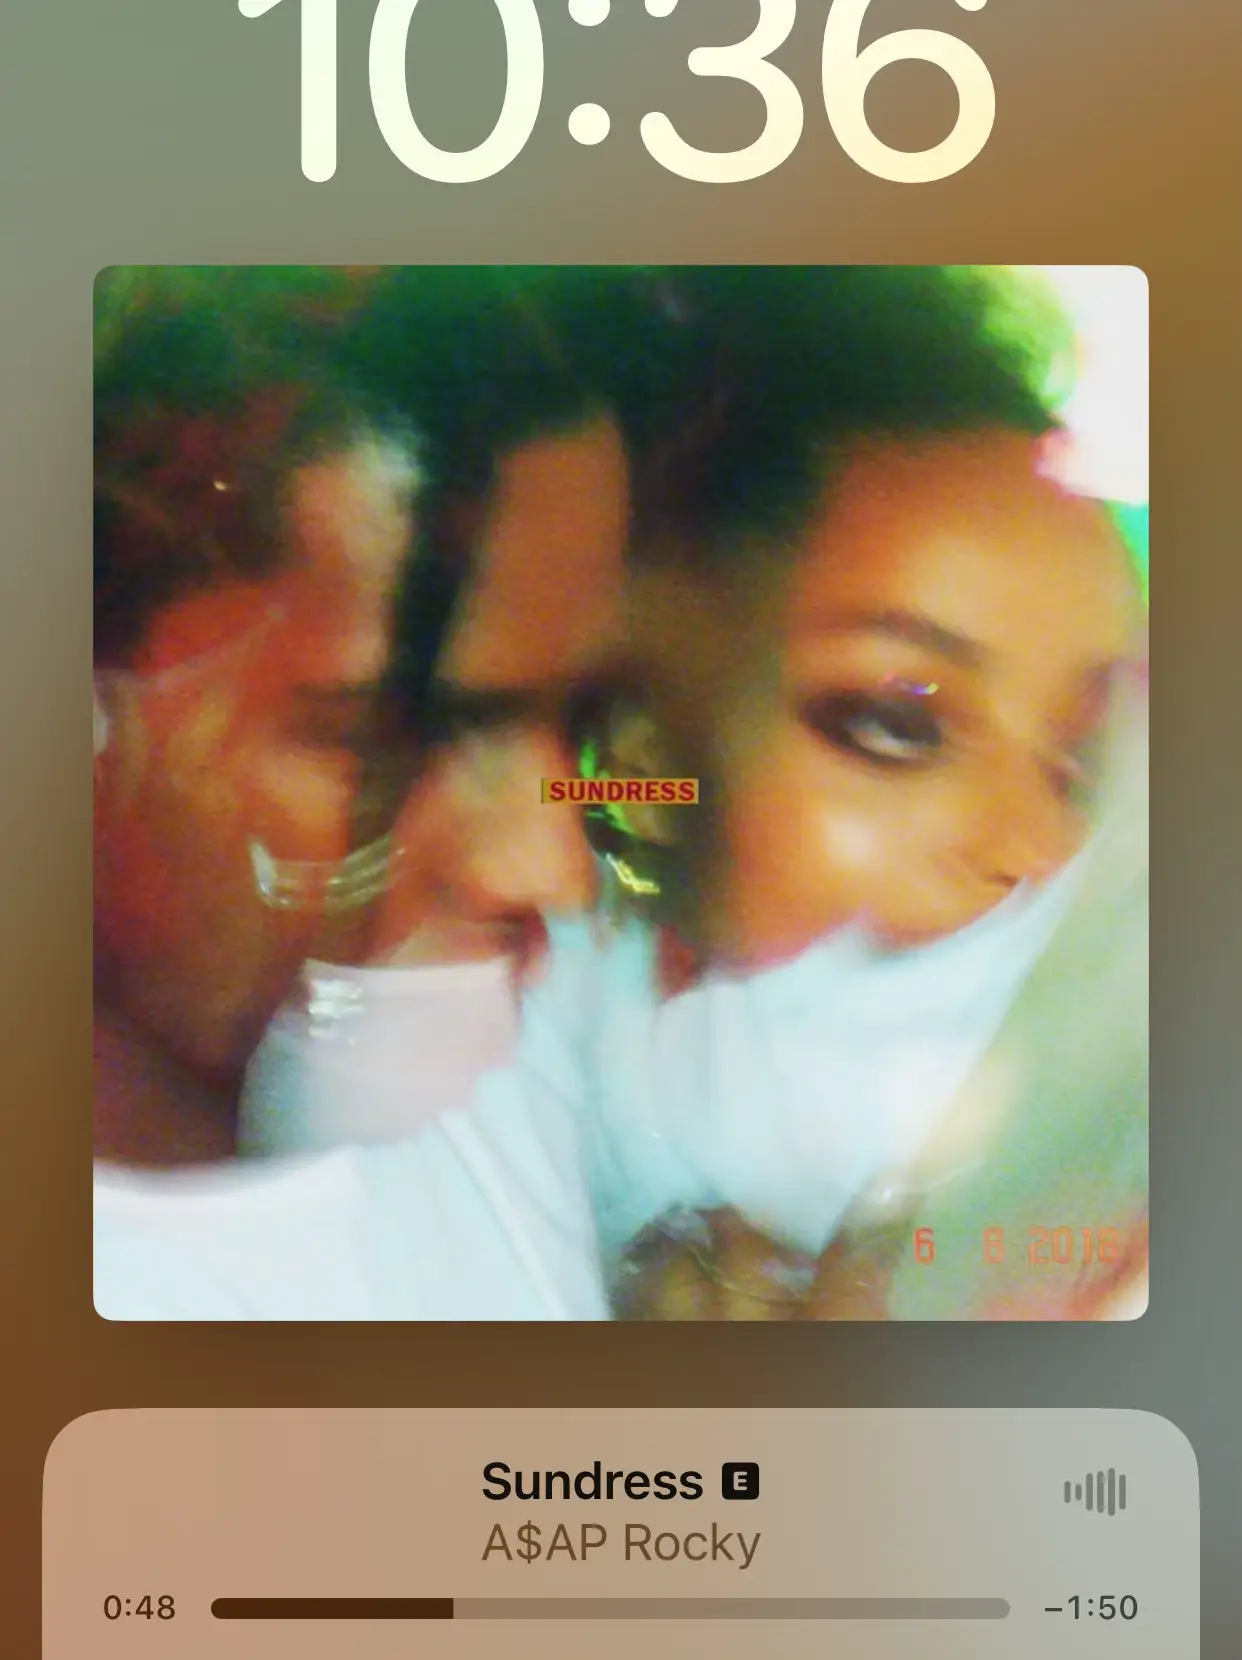  A phone screen displaying a song by A$AP Rocky.